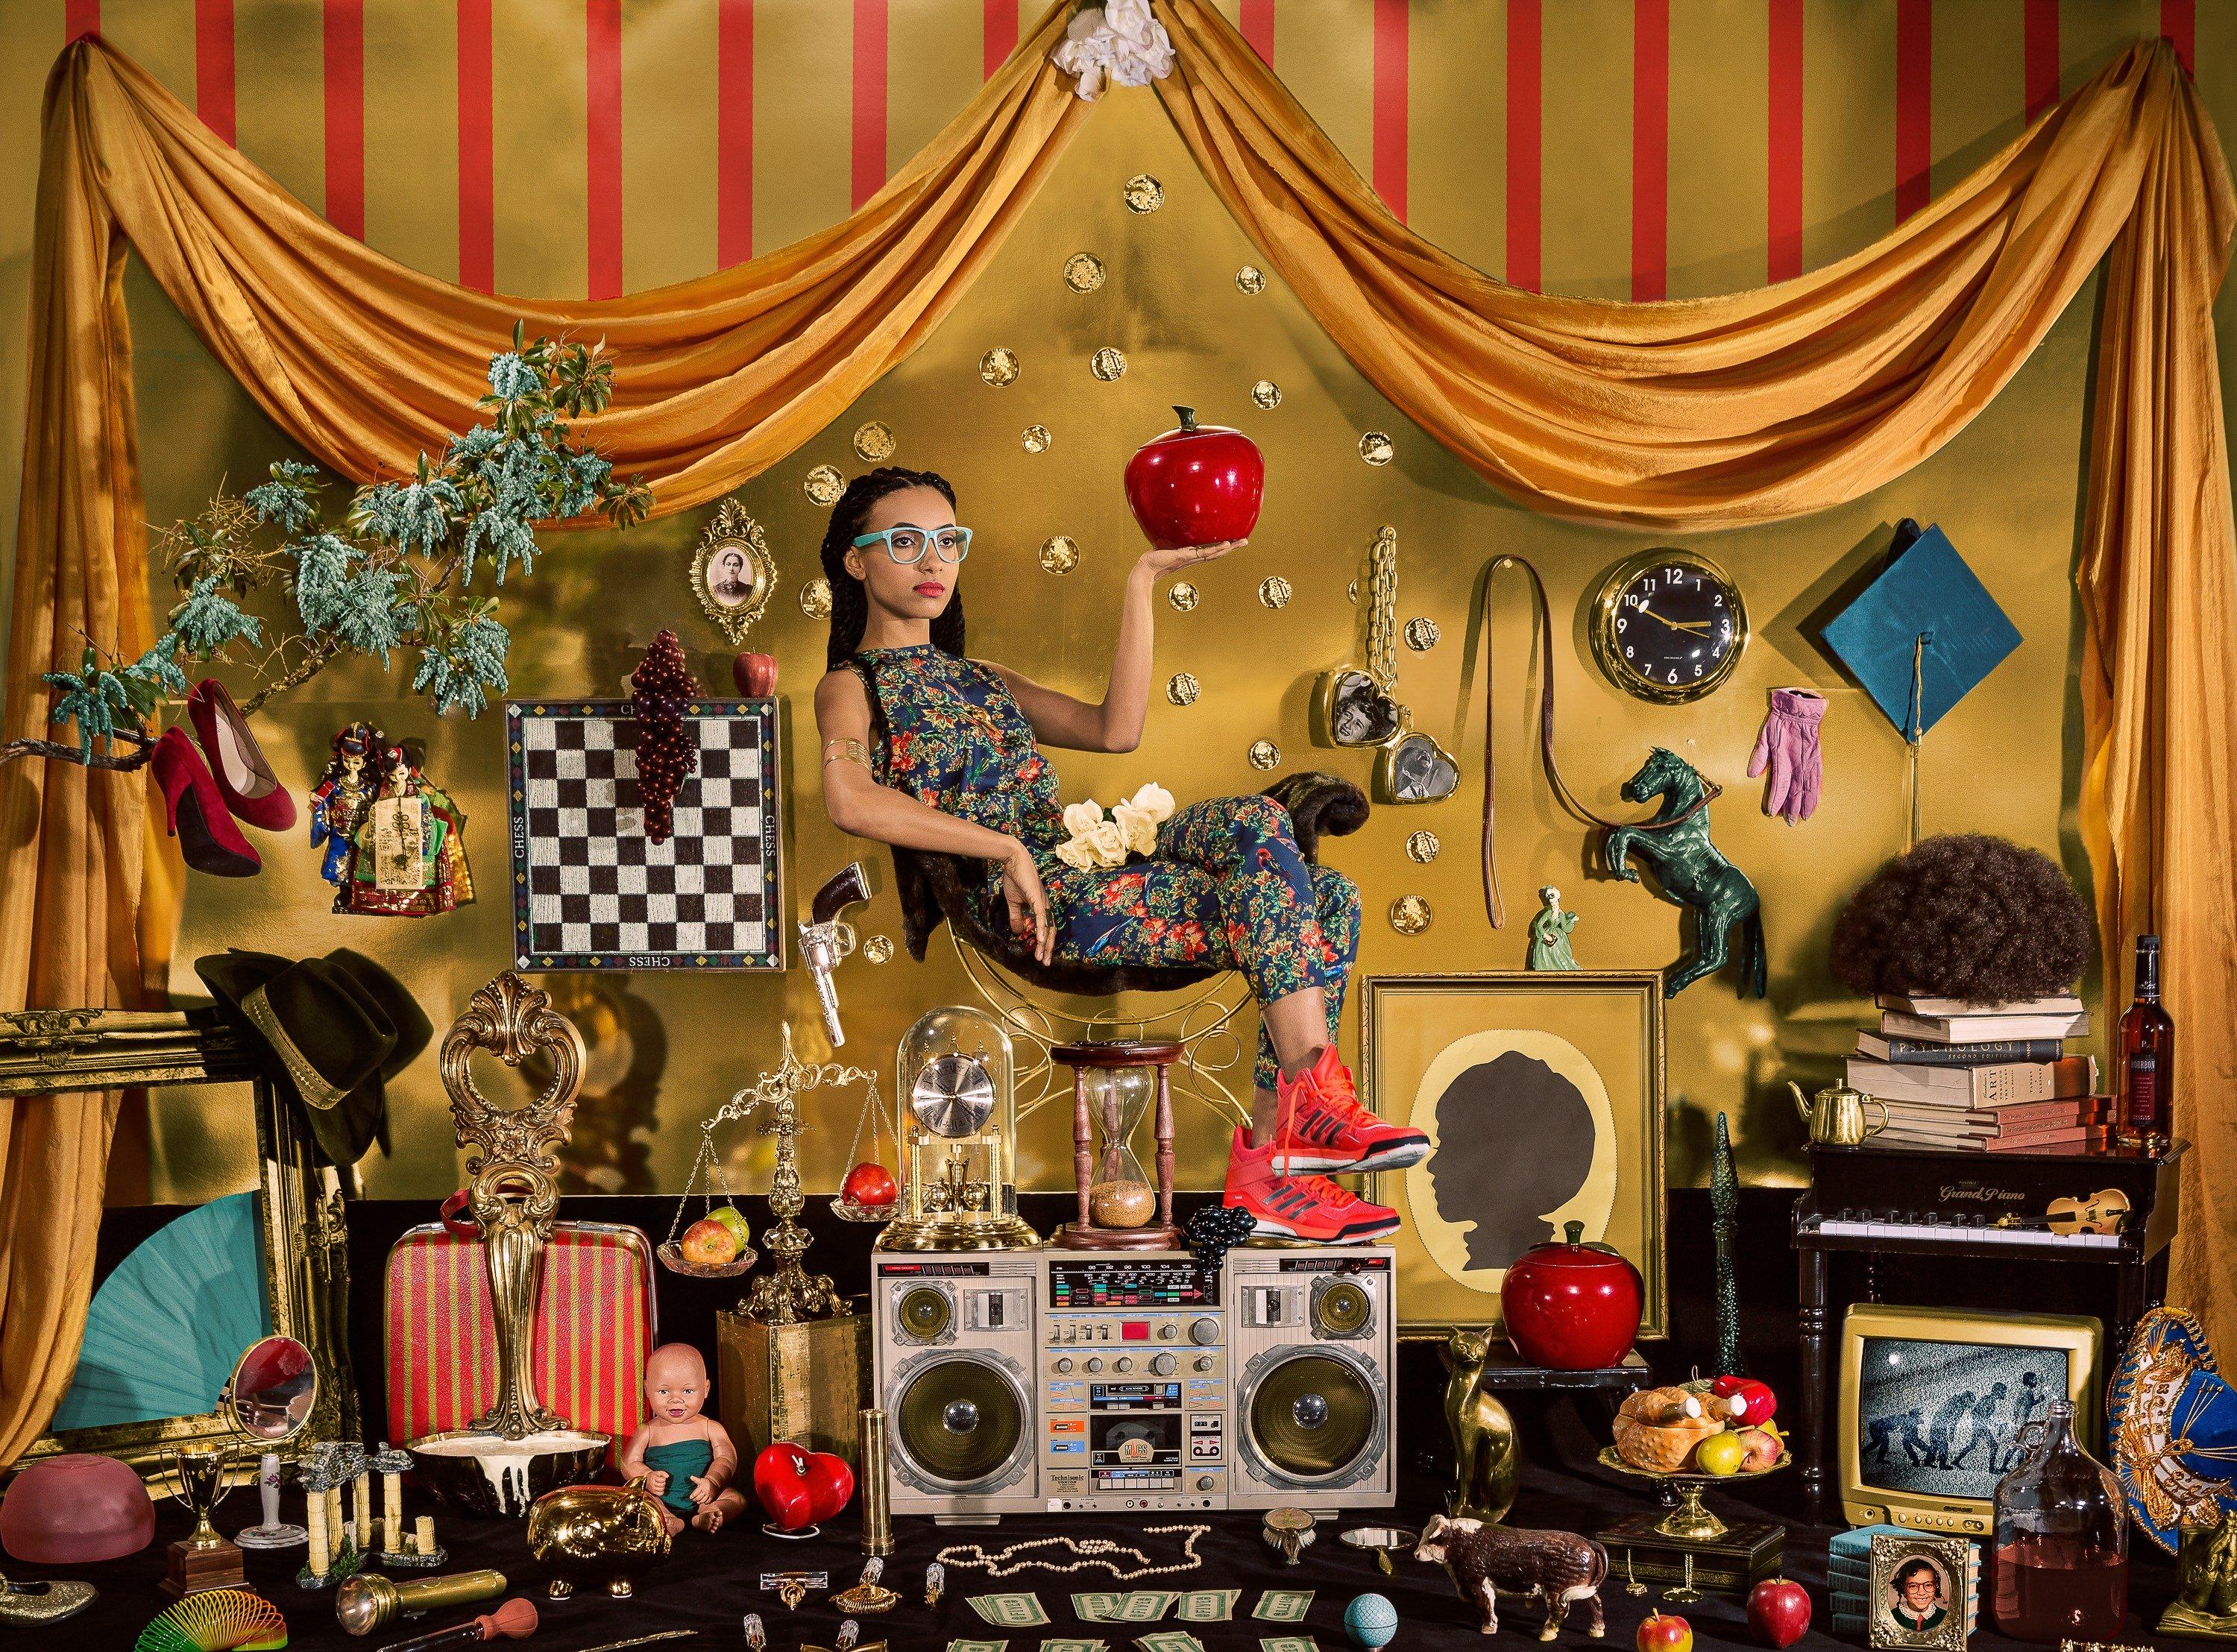 Esperanza Spalding sits atop a boombox in an elaborately decorated scene by photographer Holly Andres